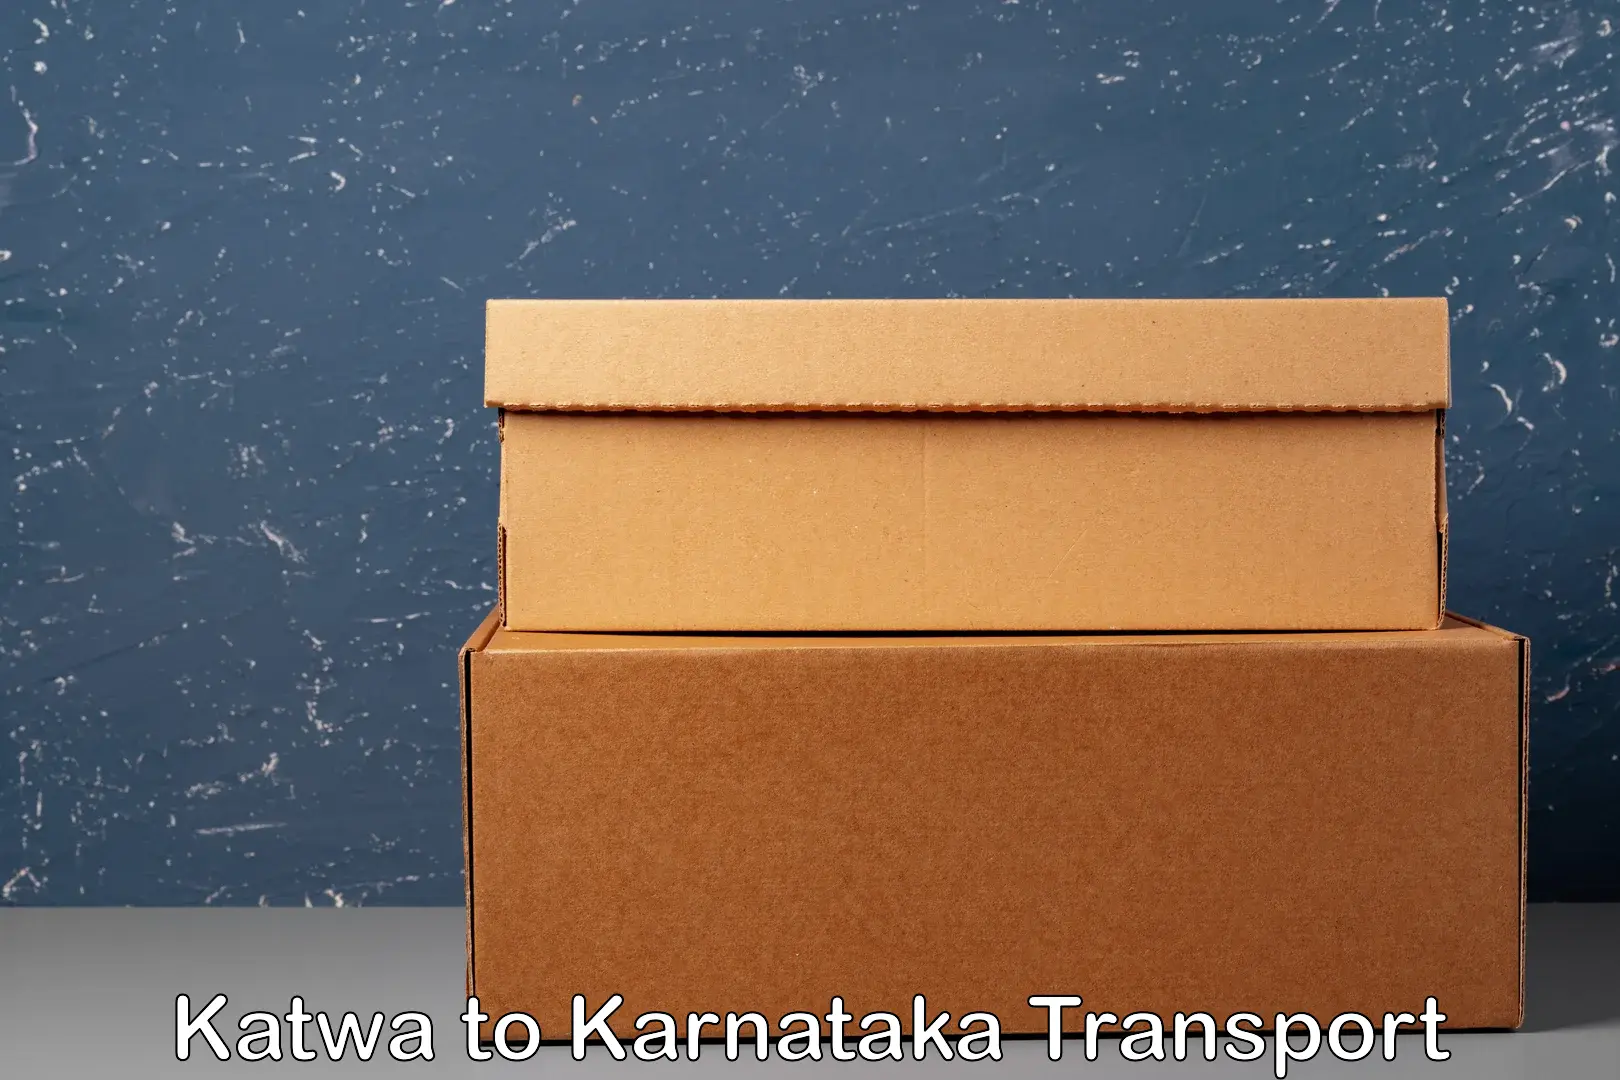 Nearest transport service in Katwa to Manipal